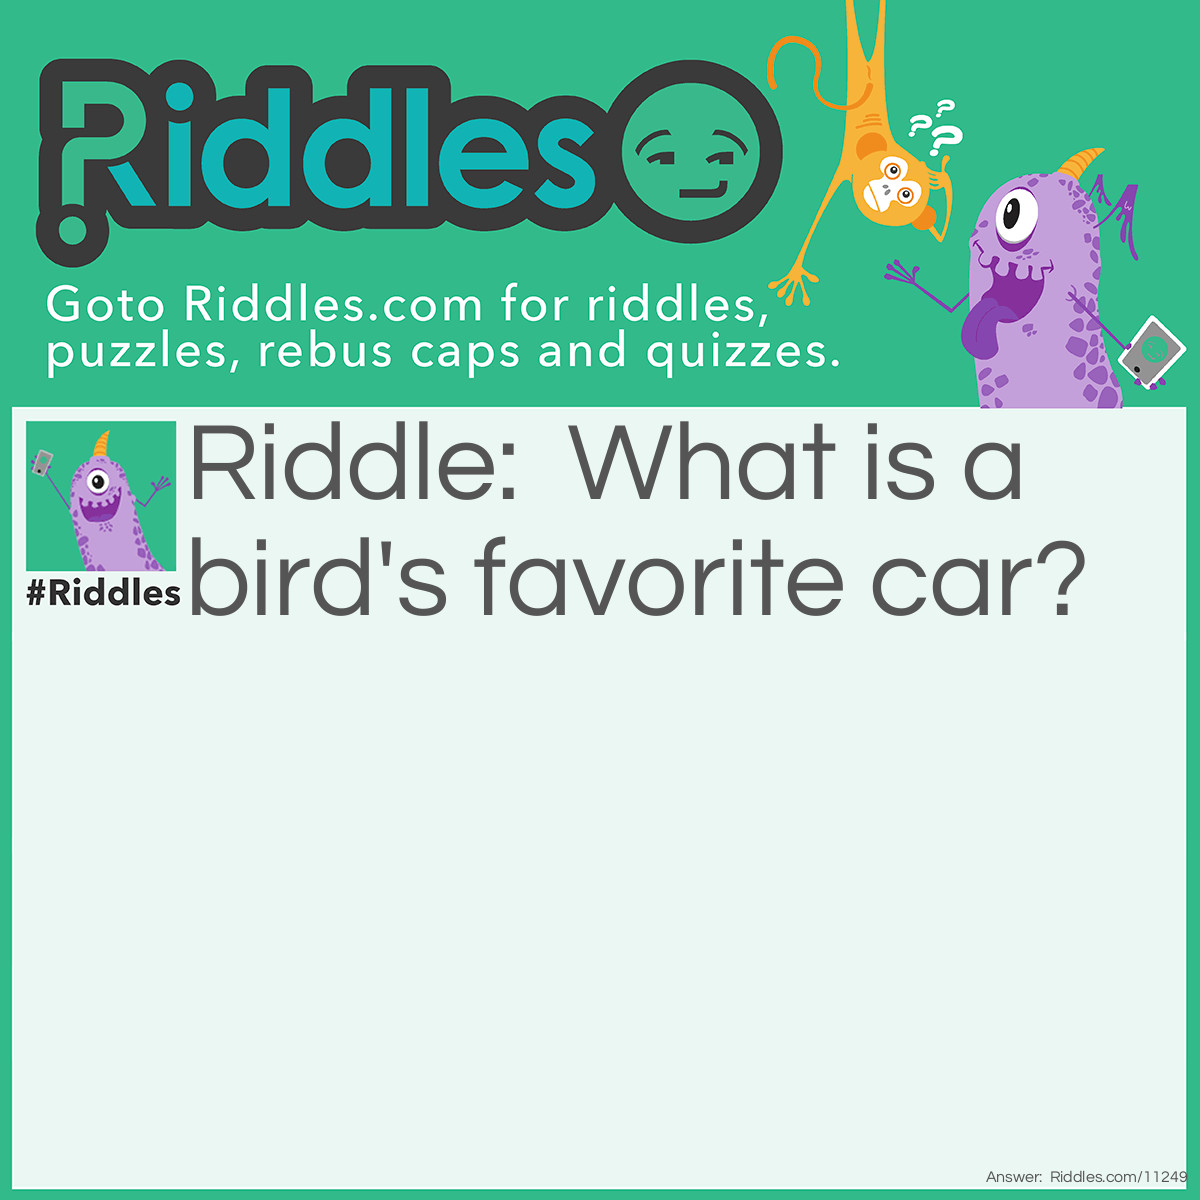 Riddle: What is a bird's favorite car? Answer: Jeep! Jeep!